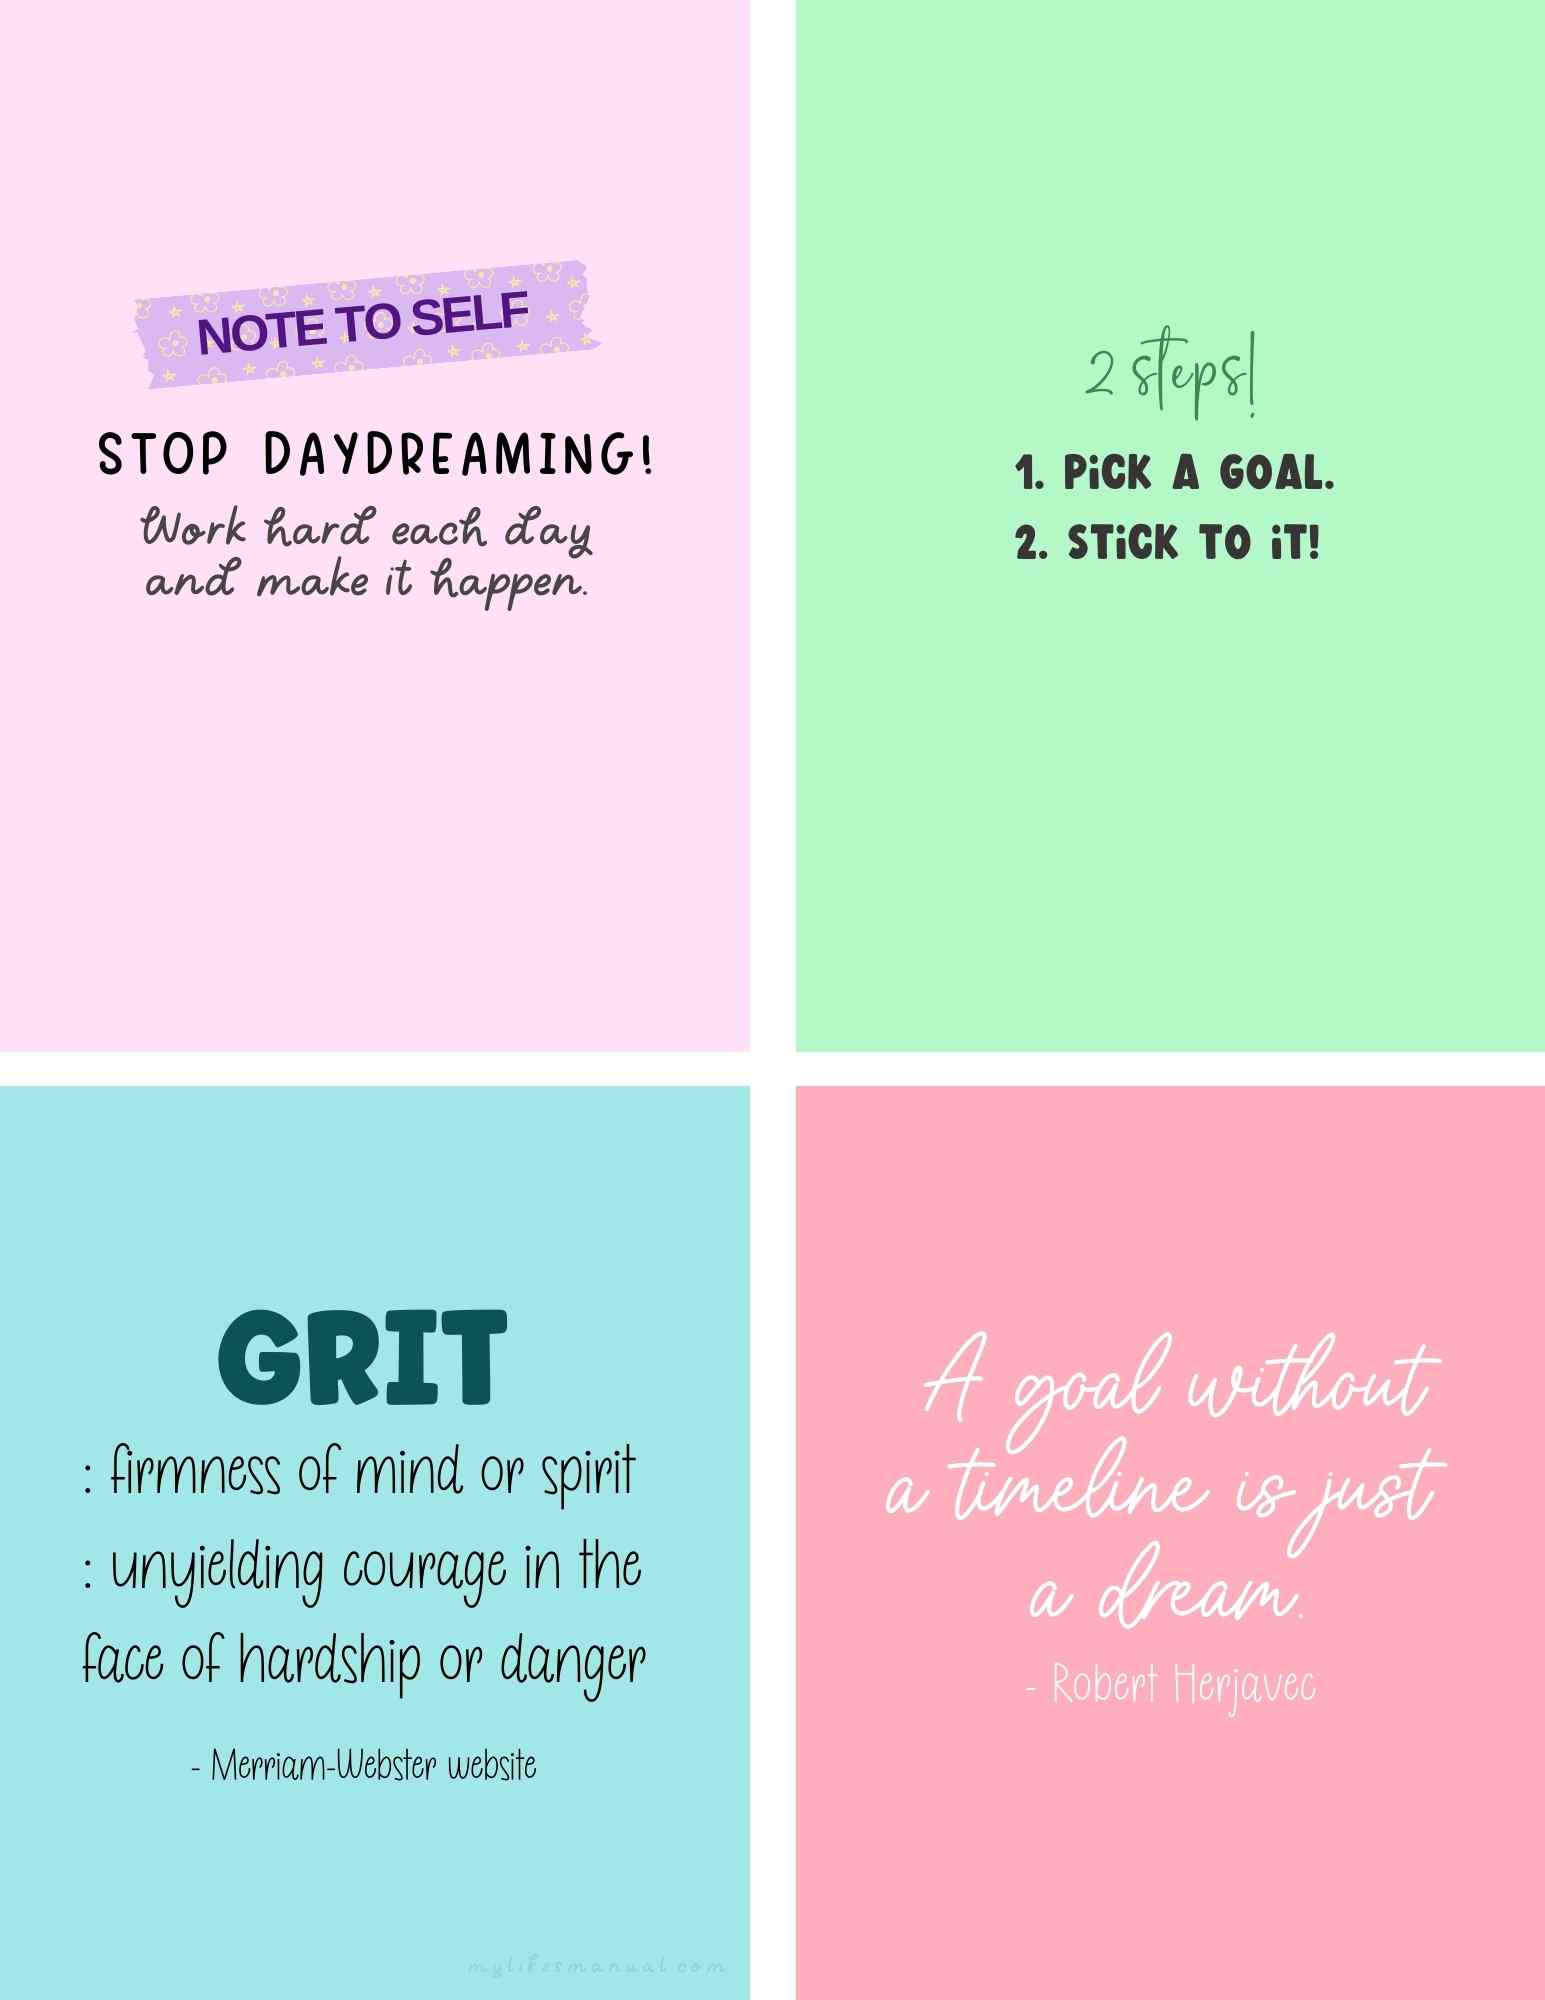 Vision board ideas. Affirmation quotes